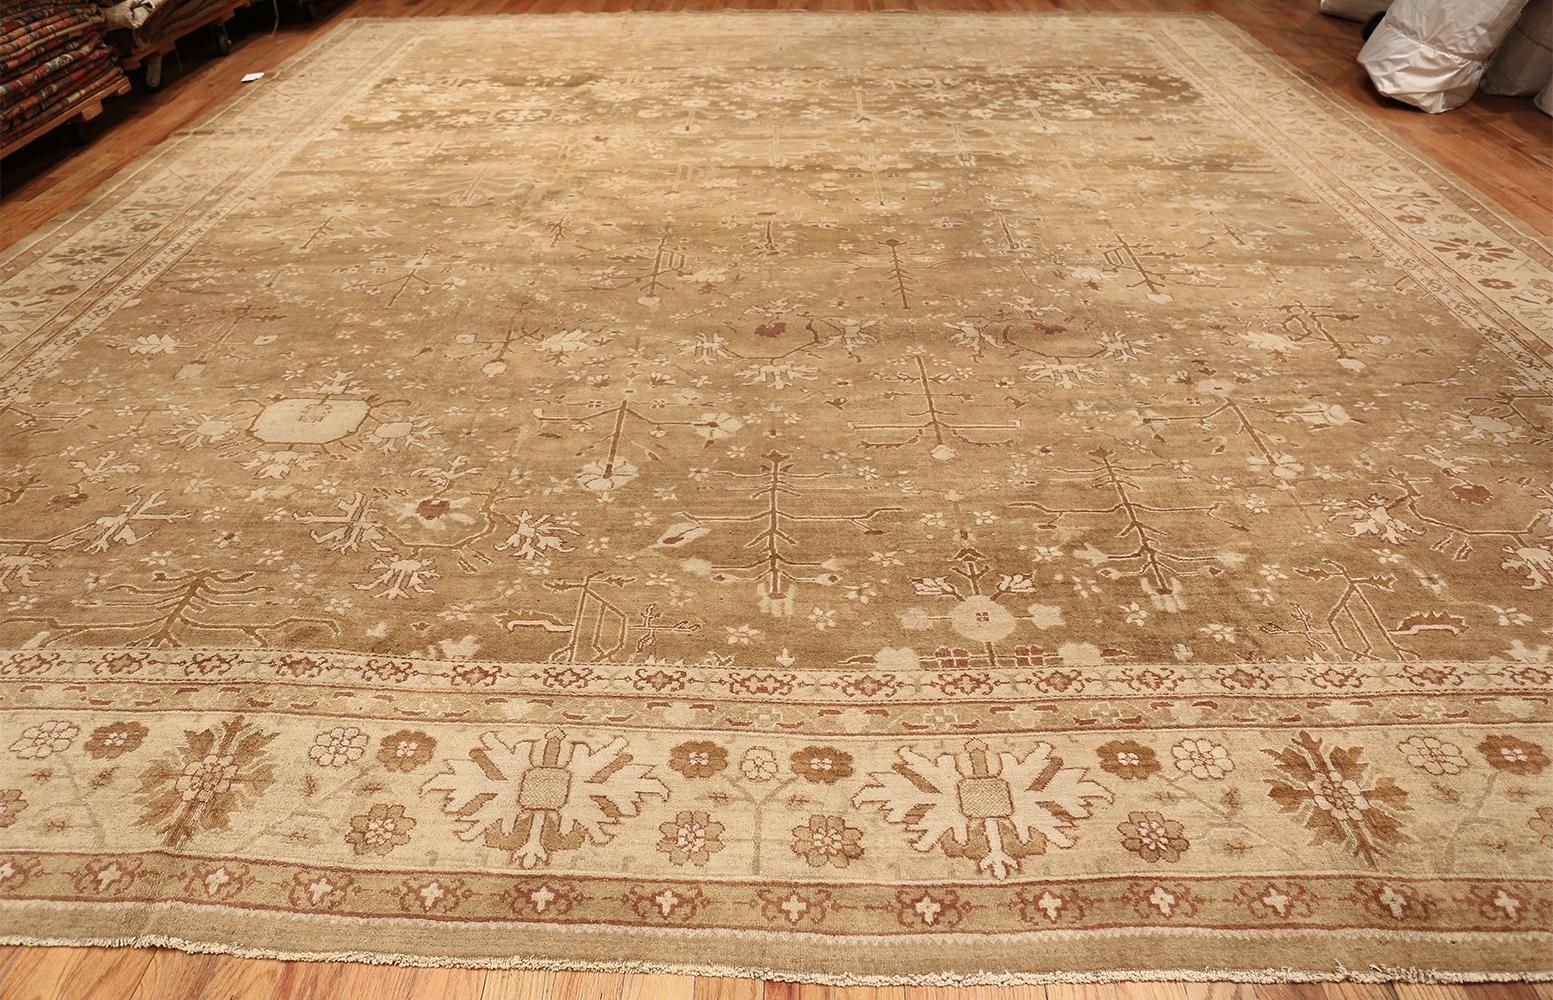 Rare Moss Green Antique Indian Amritsar Rug, Country of Origin: India, Circa Date: Early 20th Century. Size: 15 ft x 17 ft (4.57 m x 5.18 m)

The gorgeous earthy browns of this Indian Amritsar carpet from the early 20th century are the perfect